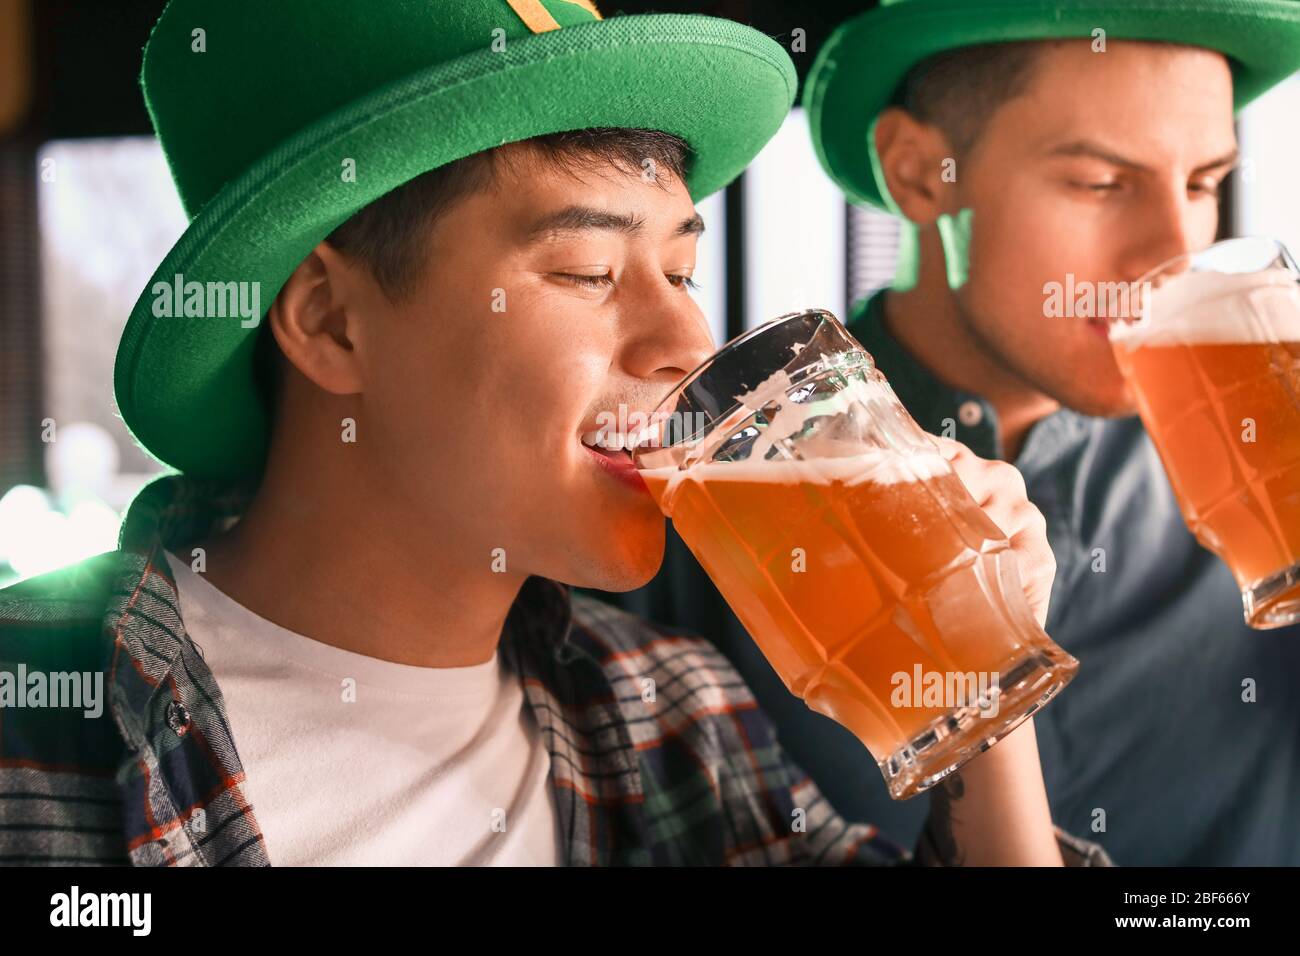 Young Asian man celebrating St. Patrick's Day in pub Stock Photo